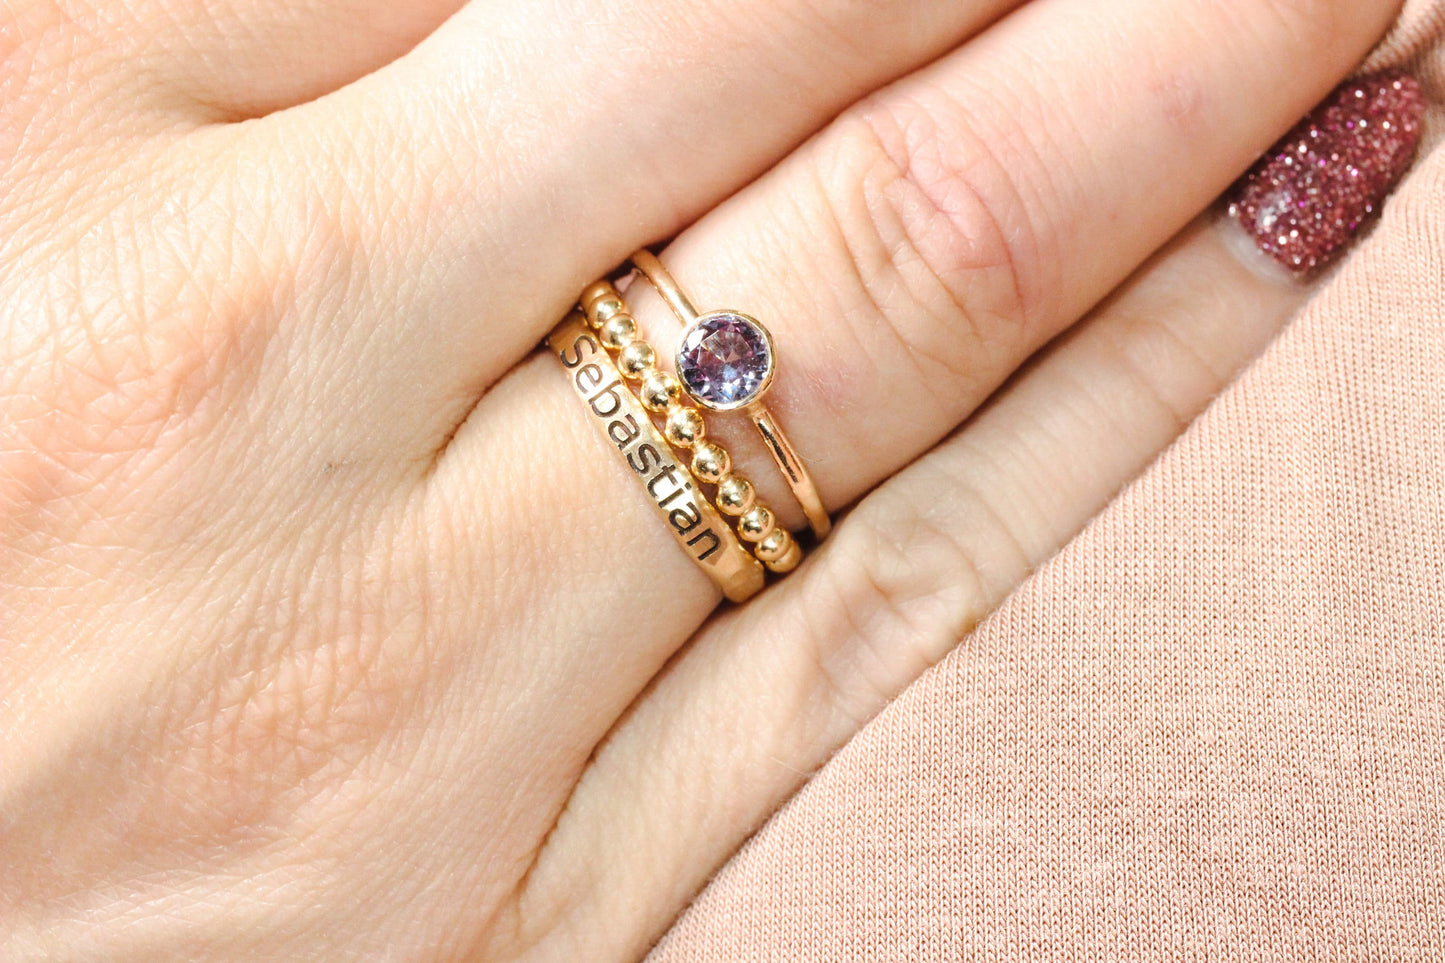 Sterling Silver Amethyst Stacking Ring // 5mm Faceted Gemstone February Birthstone Stackable Ring // Genuine Amethyst Ring